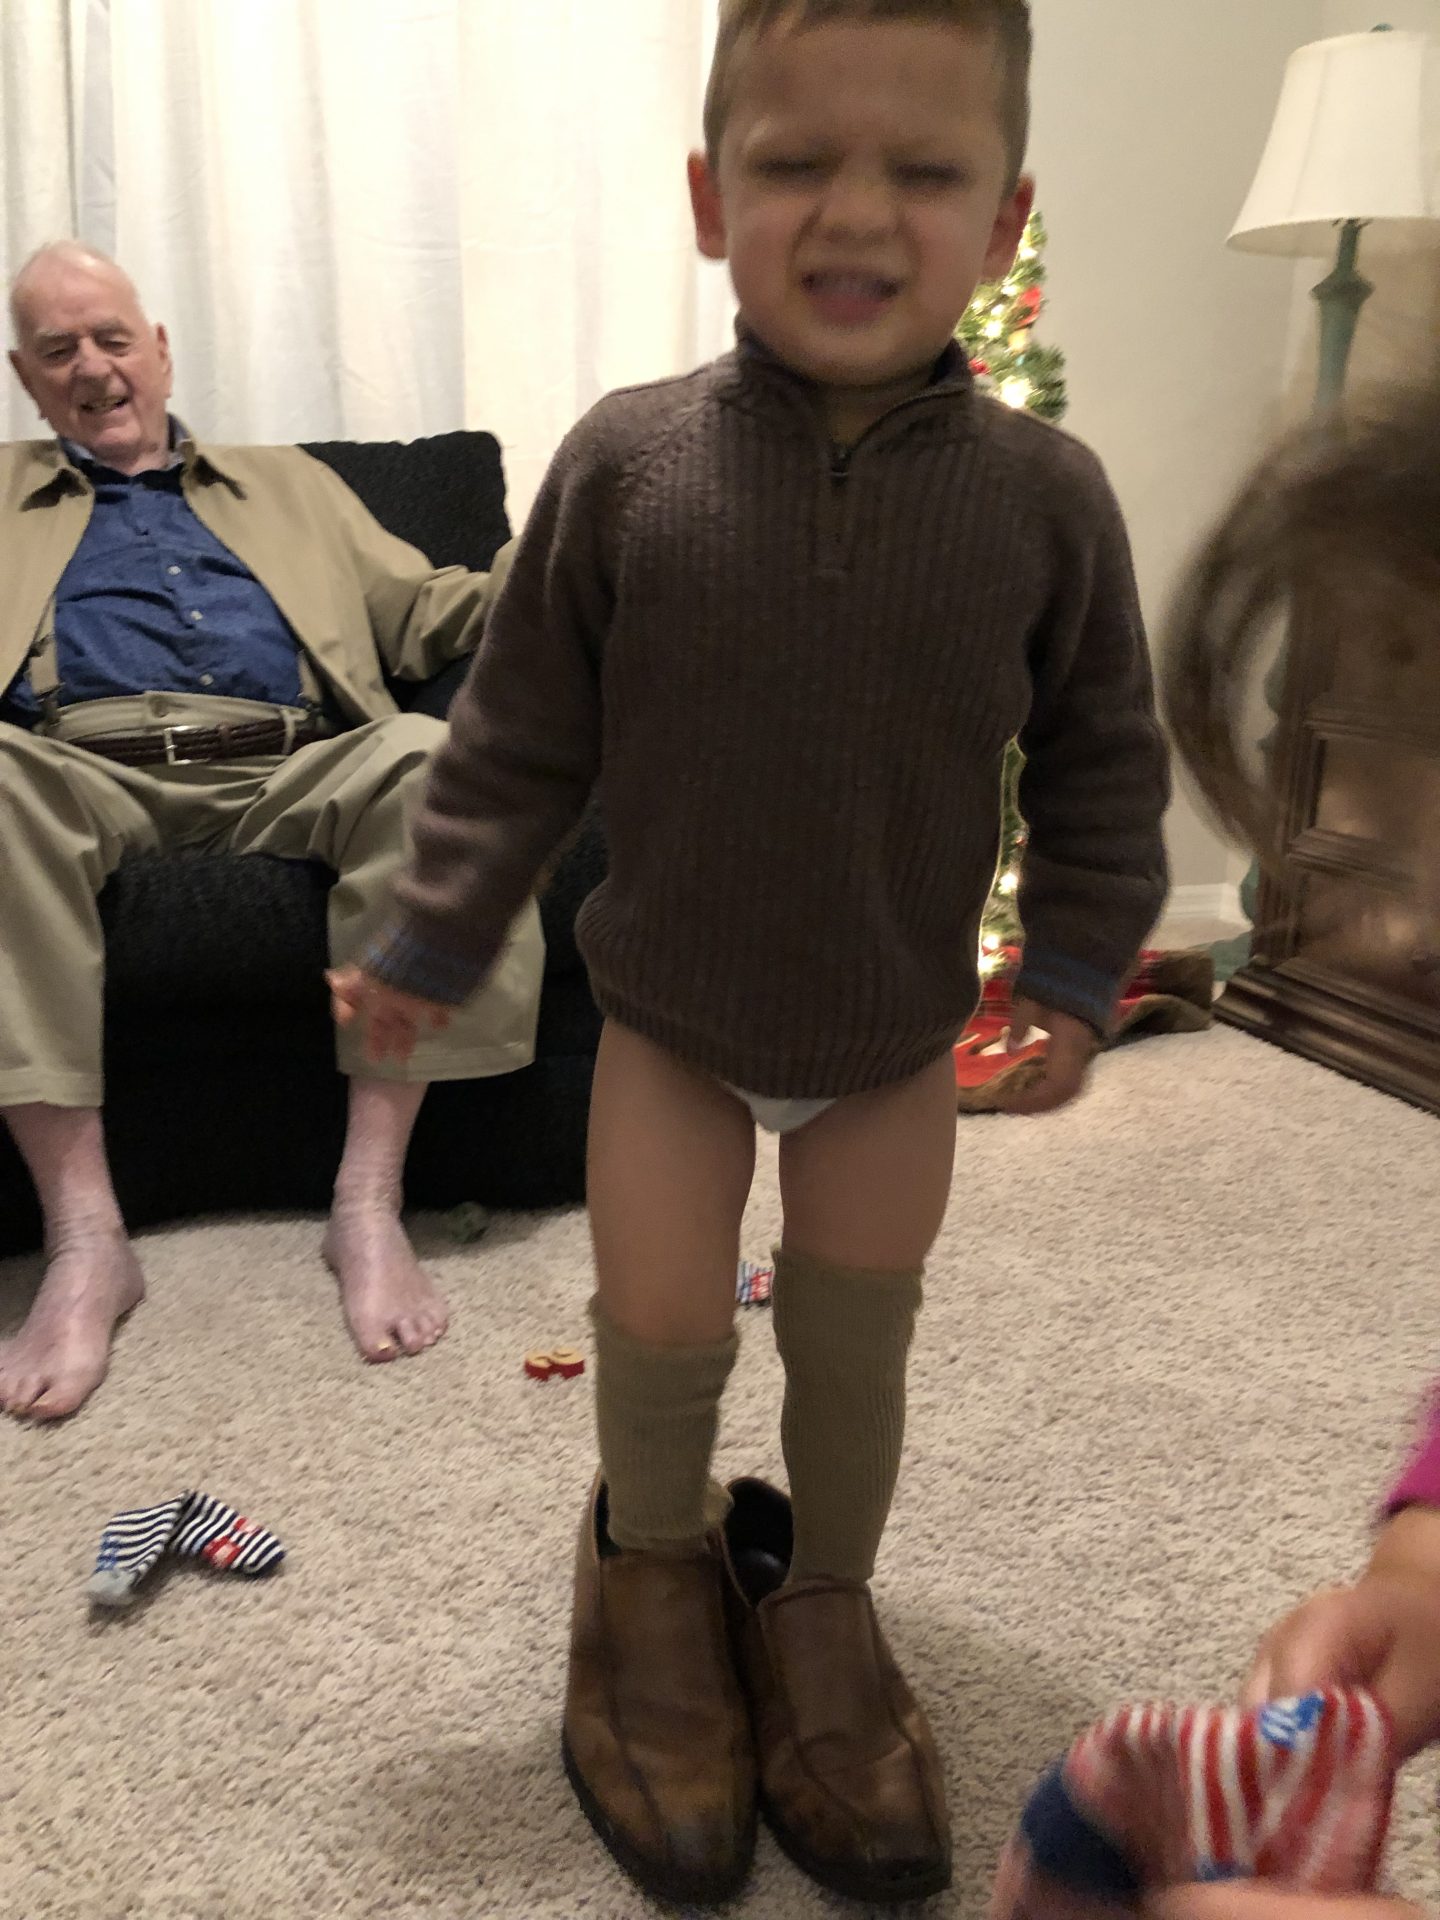 He was so proud to have on Double G’s  shoes and socks.